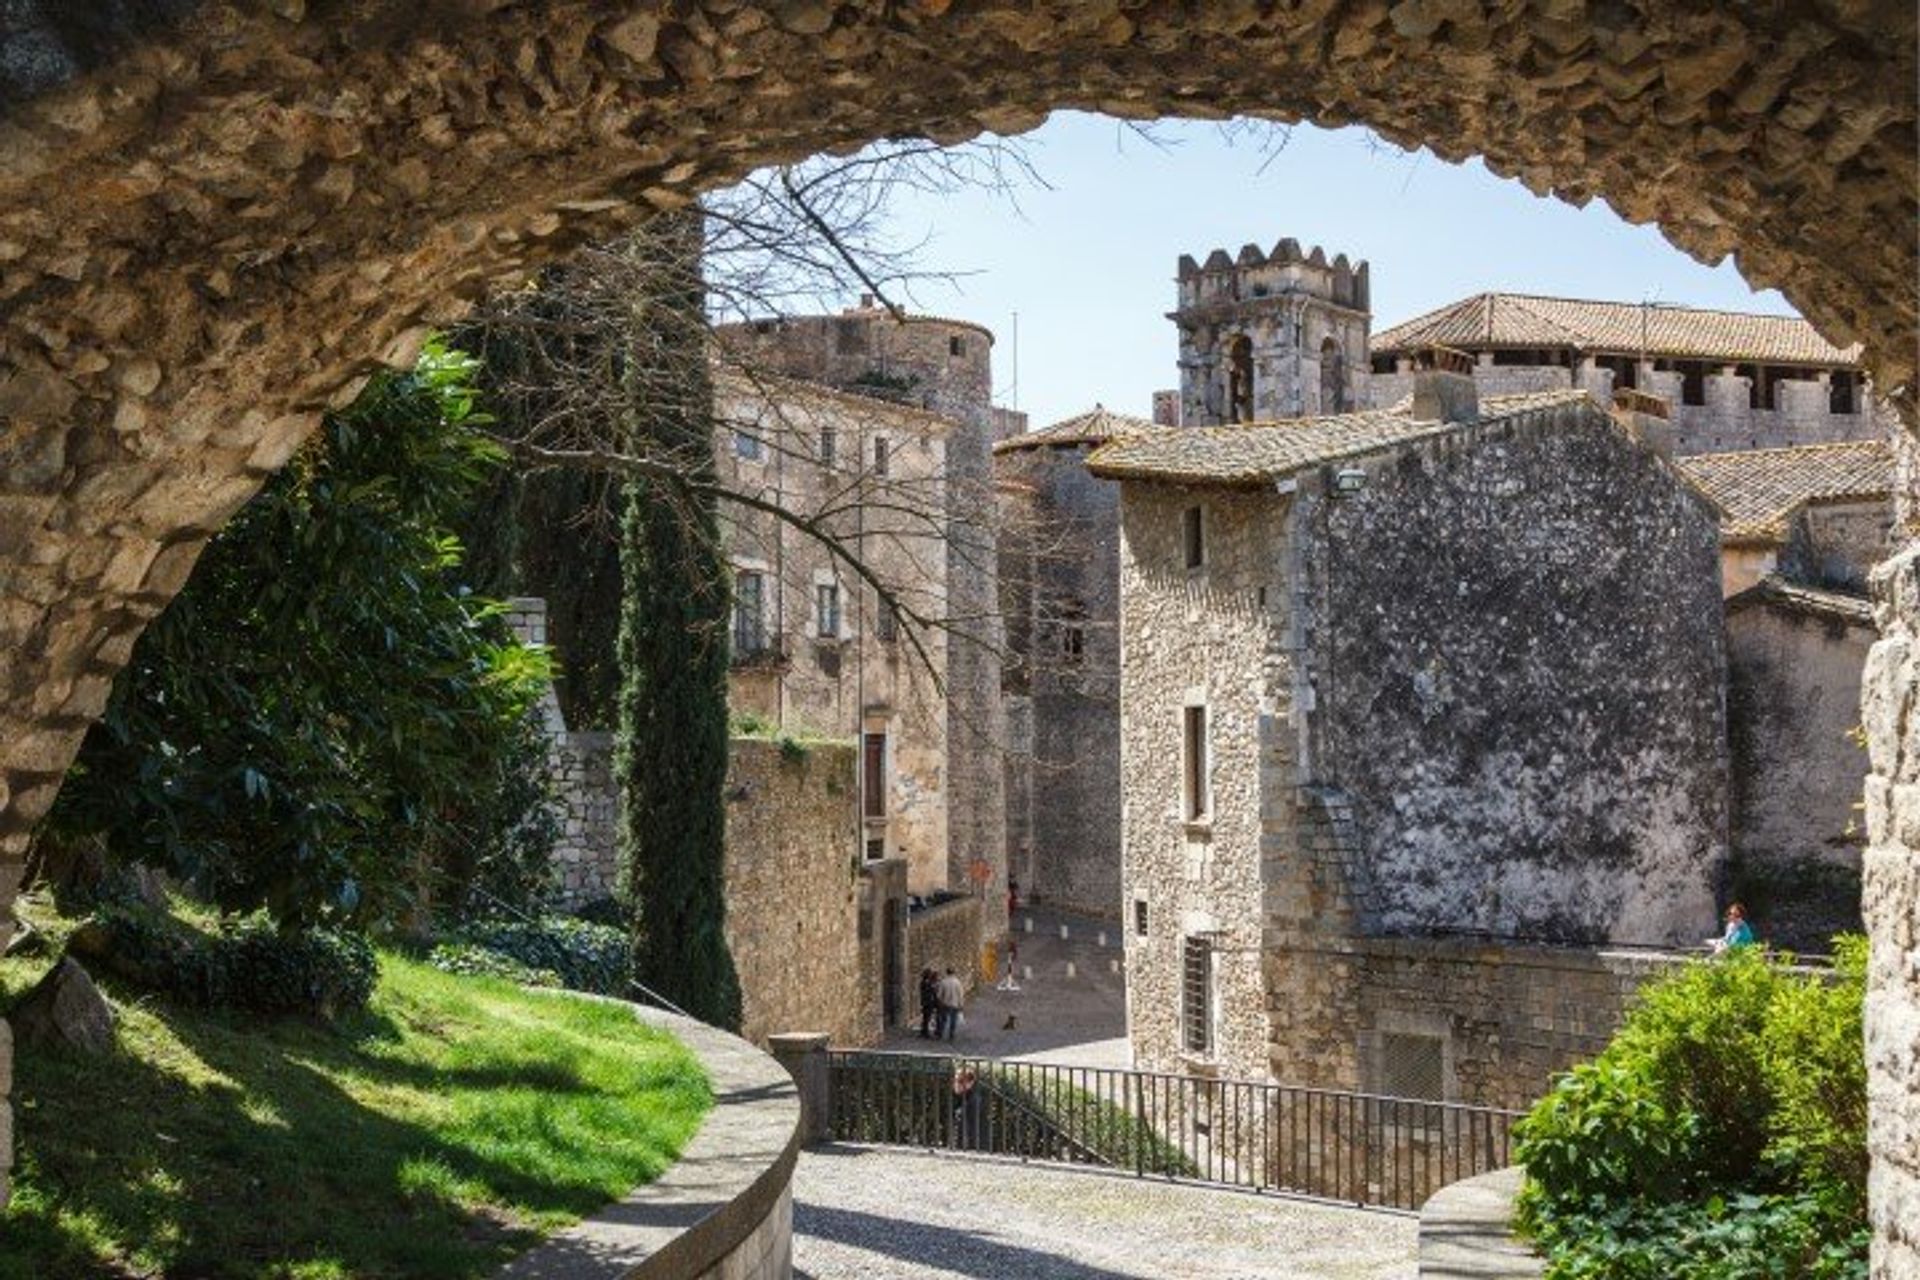 Take a trip back in time in Girona's old Jewish Quarter, a labyrinth of narrow streets dotted with Medieval architecture